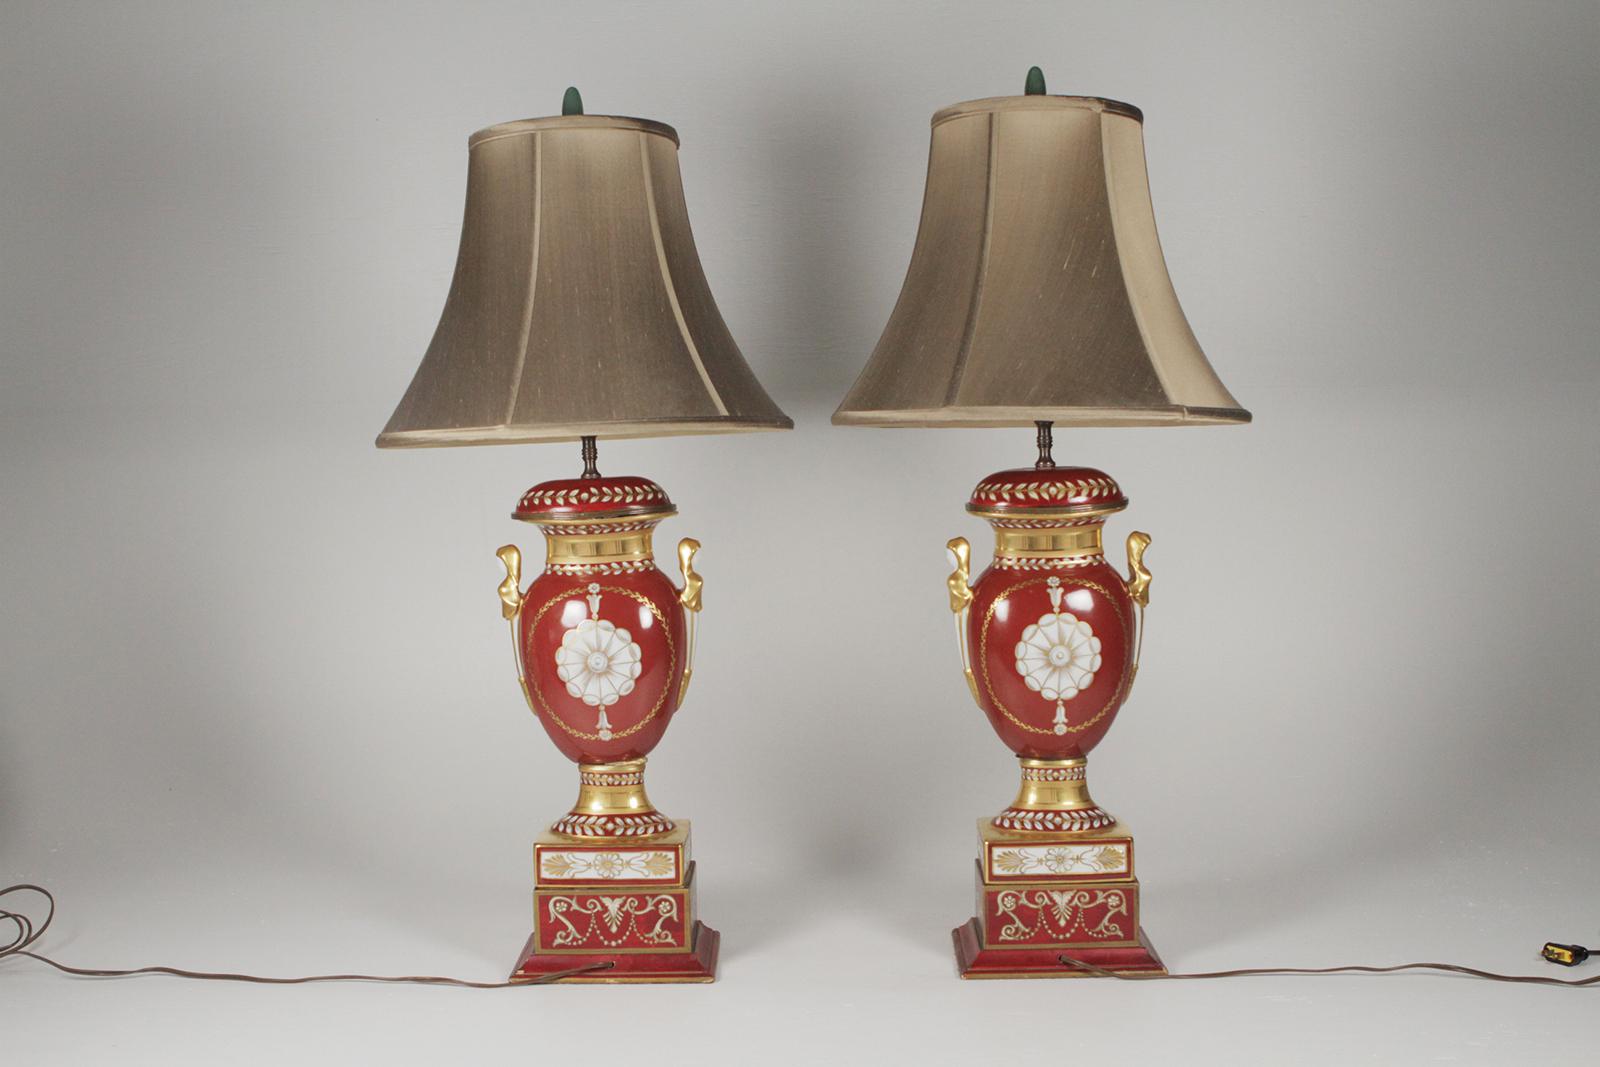 Neoclassical Pair of Gilt and Painted Porcelain Table Lamps